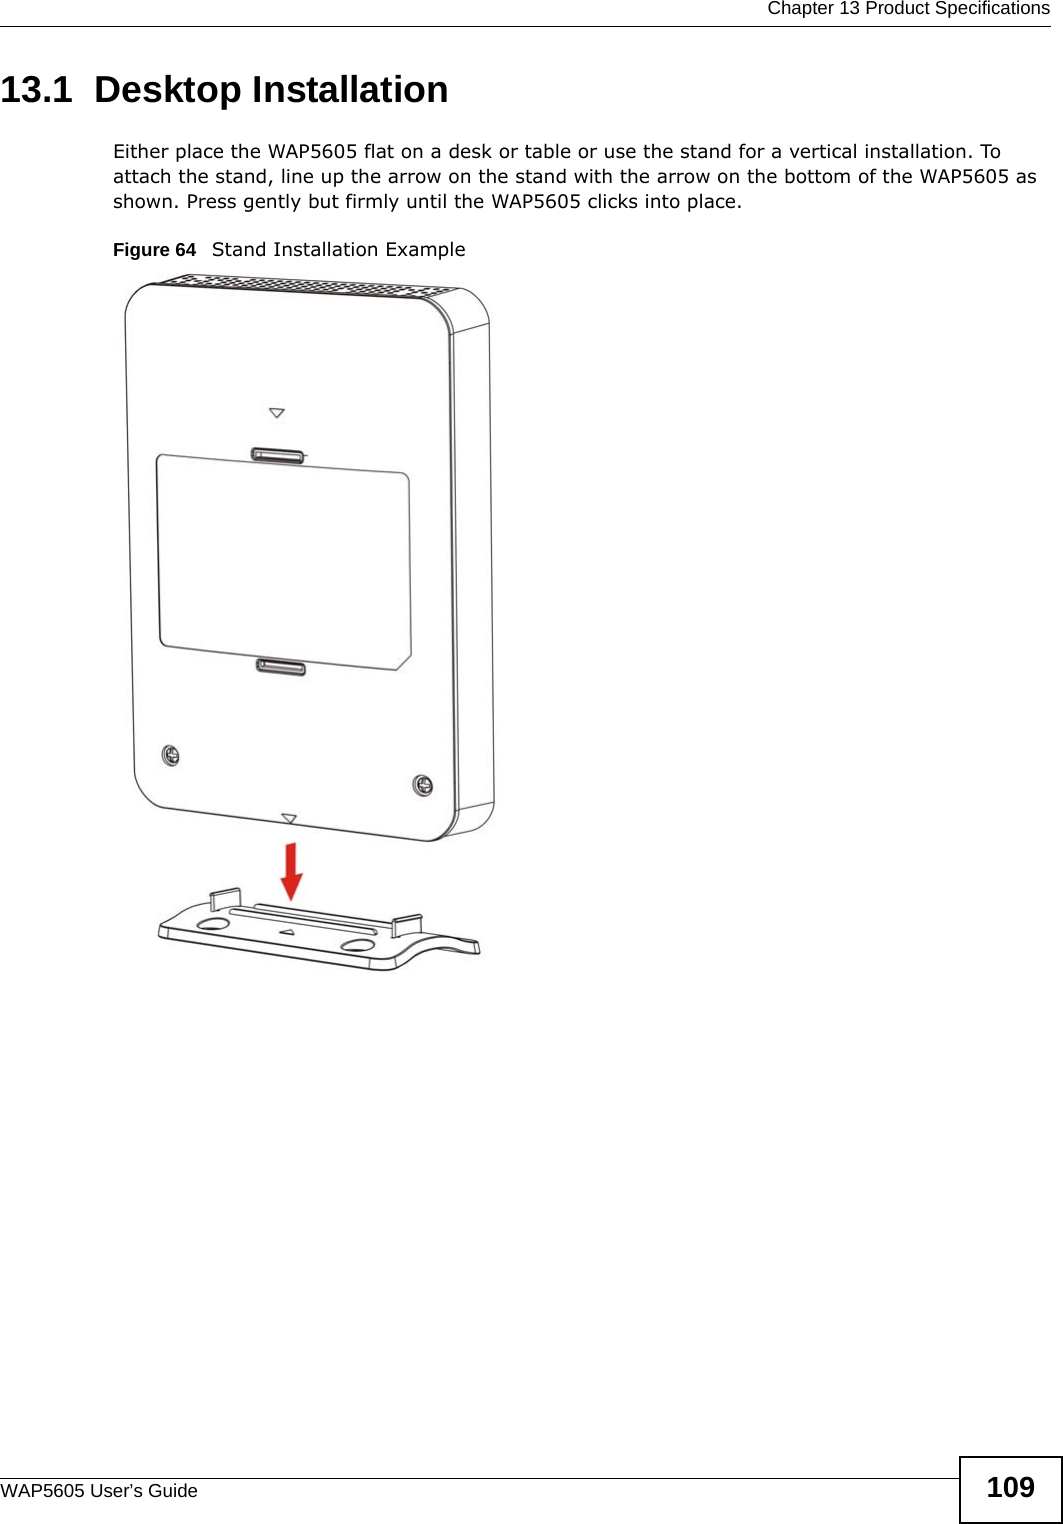  Chapter 13 Product SpecificationsWAP5605 User’s Guide 10913.1  Desktop InstallationEither place the WAP5605 flat on a desk or table or use the stand for a vertical installation. To attach the stand, line up the arrow on the stand with the arrow on the bottom of the WAP5605 as shown. Press gently but firmly until the WAP5605 clicks into place.Figure 64   Stand Installation Example